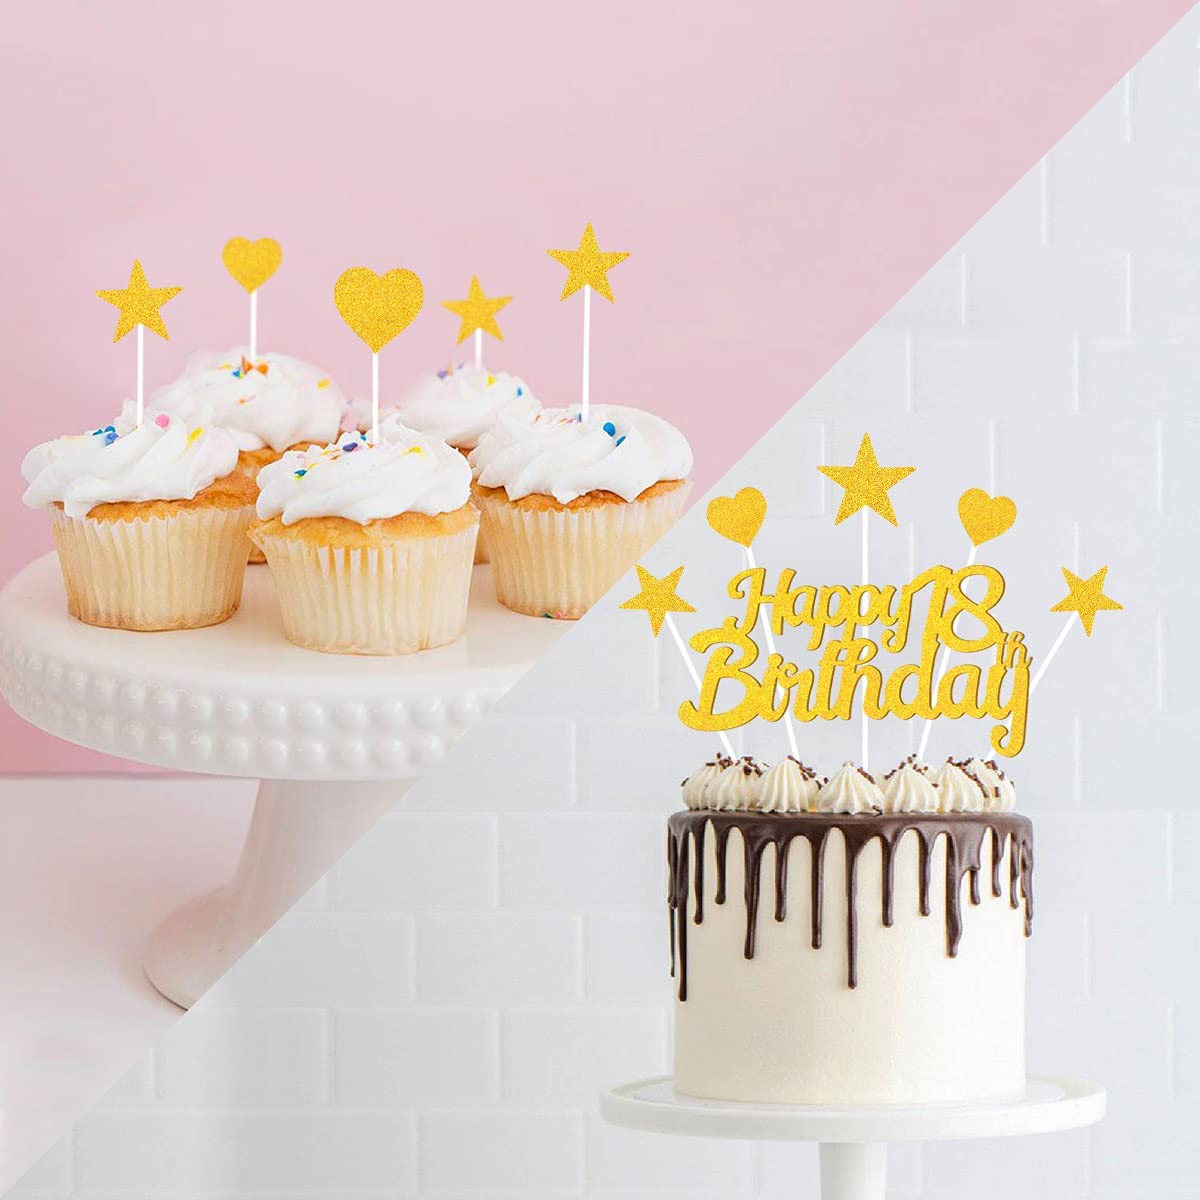 Humairc 18th Cake Toppers Boy, 18th Cake Decorations Girl, Gold Happy Birthday Cupcake Topper Star Heart Topper for Birthday Party Decor - 18 Years Old Birthday Cake Ideas - Men Women